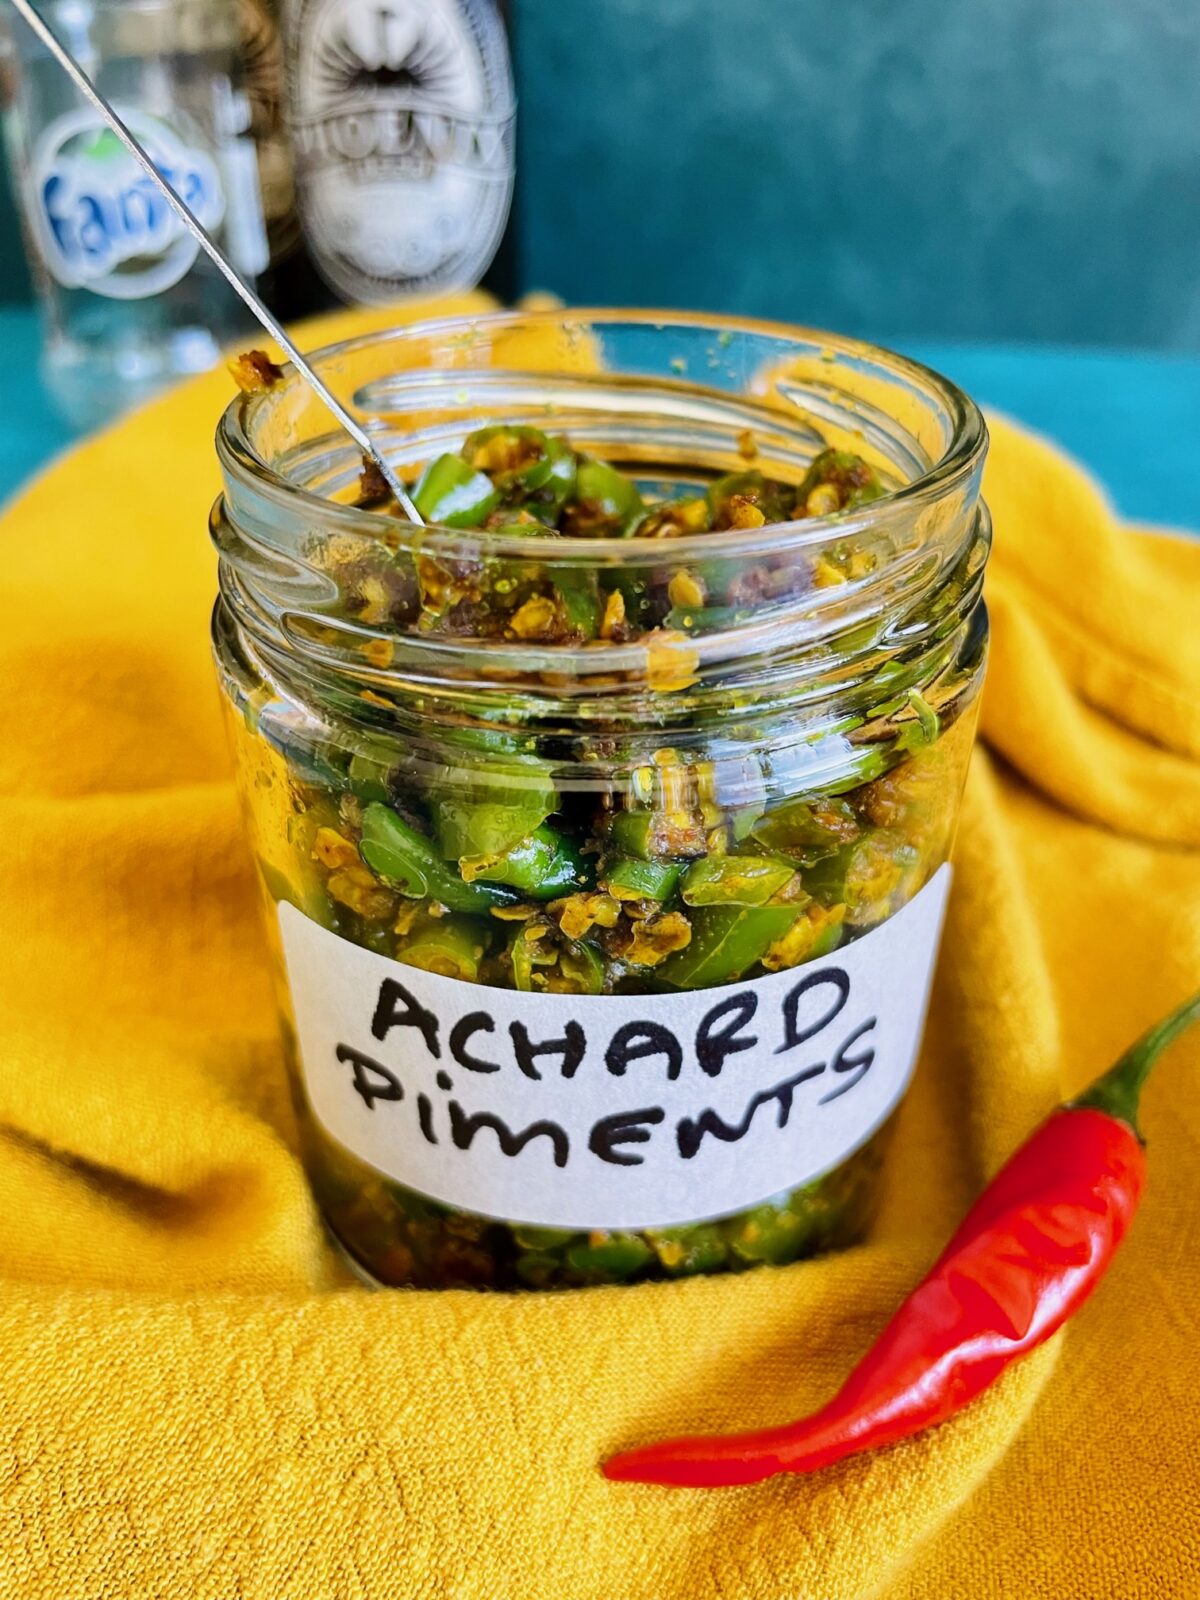 Mauritian Green Chili Achard in a glass jar and a stainless steel spoon inside the jar. A red Thai chili is in front of the jar.